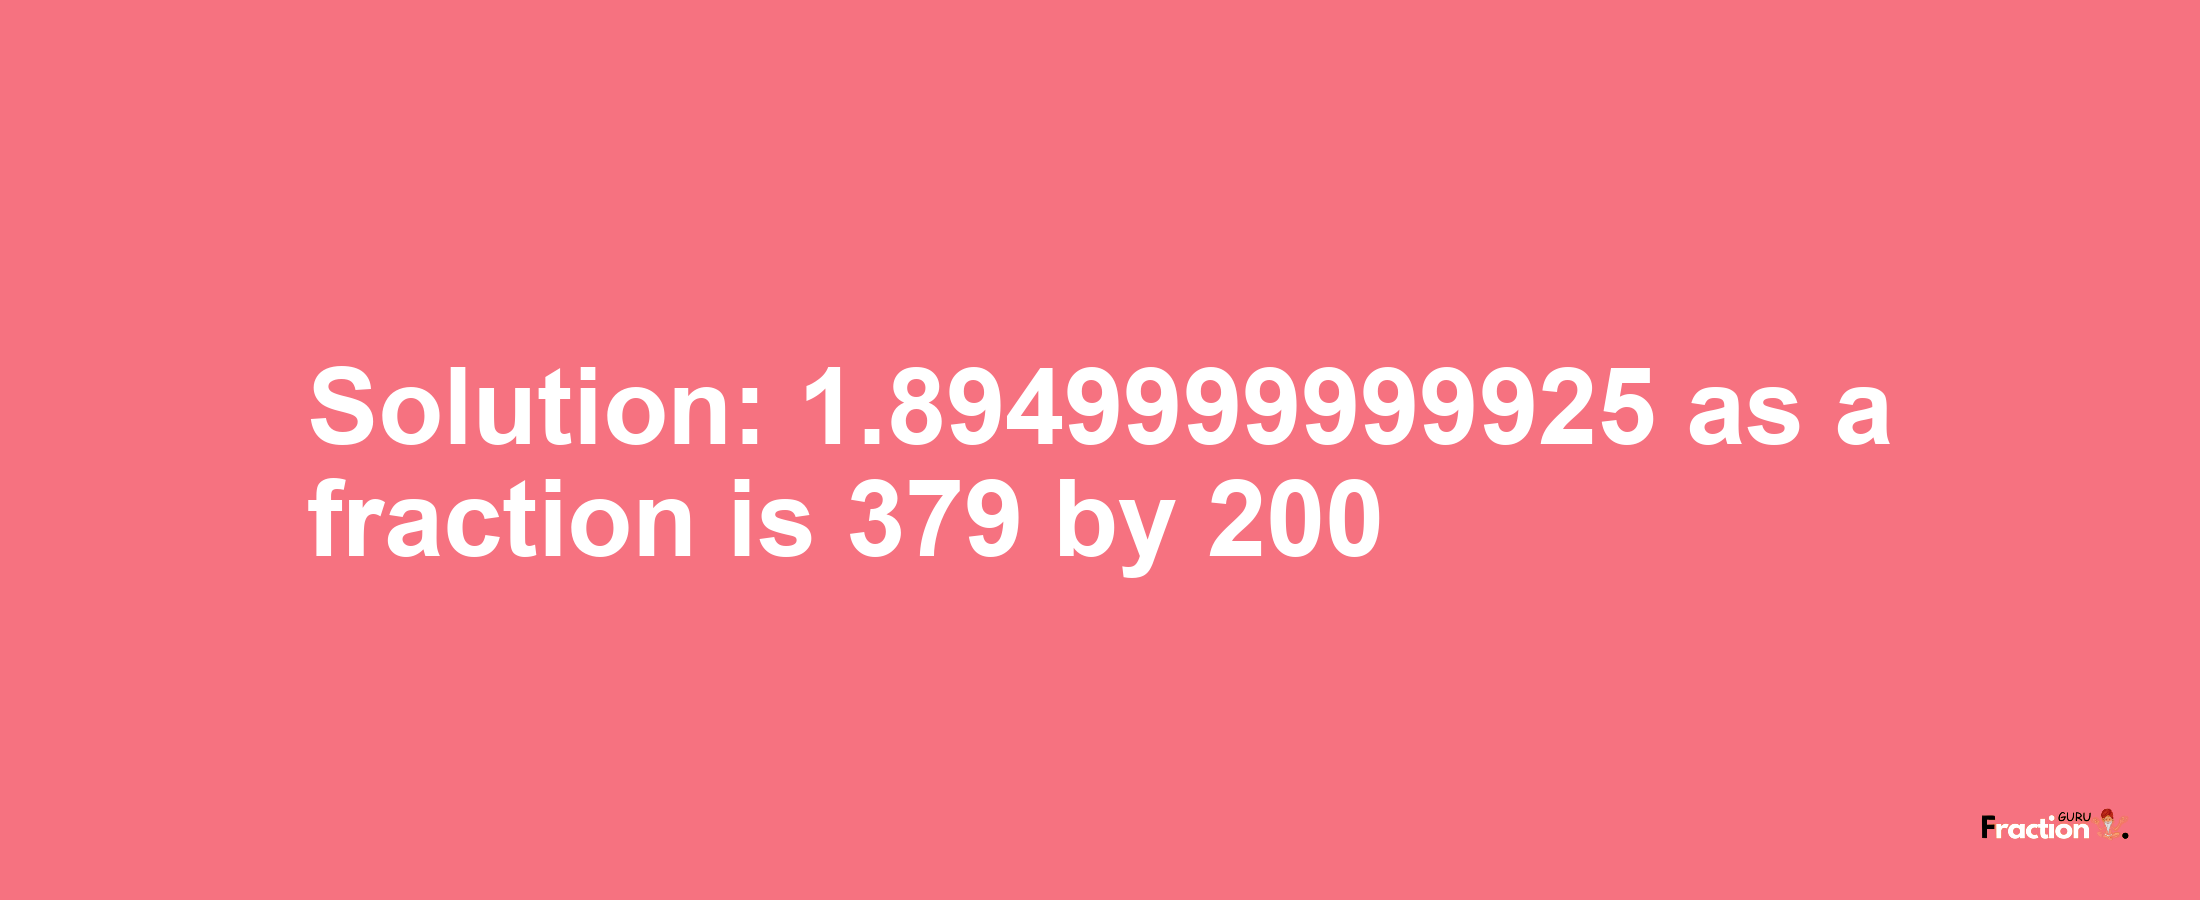 Solution:1.8949999999925 as a fraction is 379/200